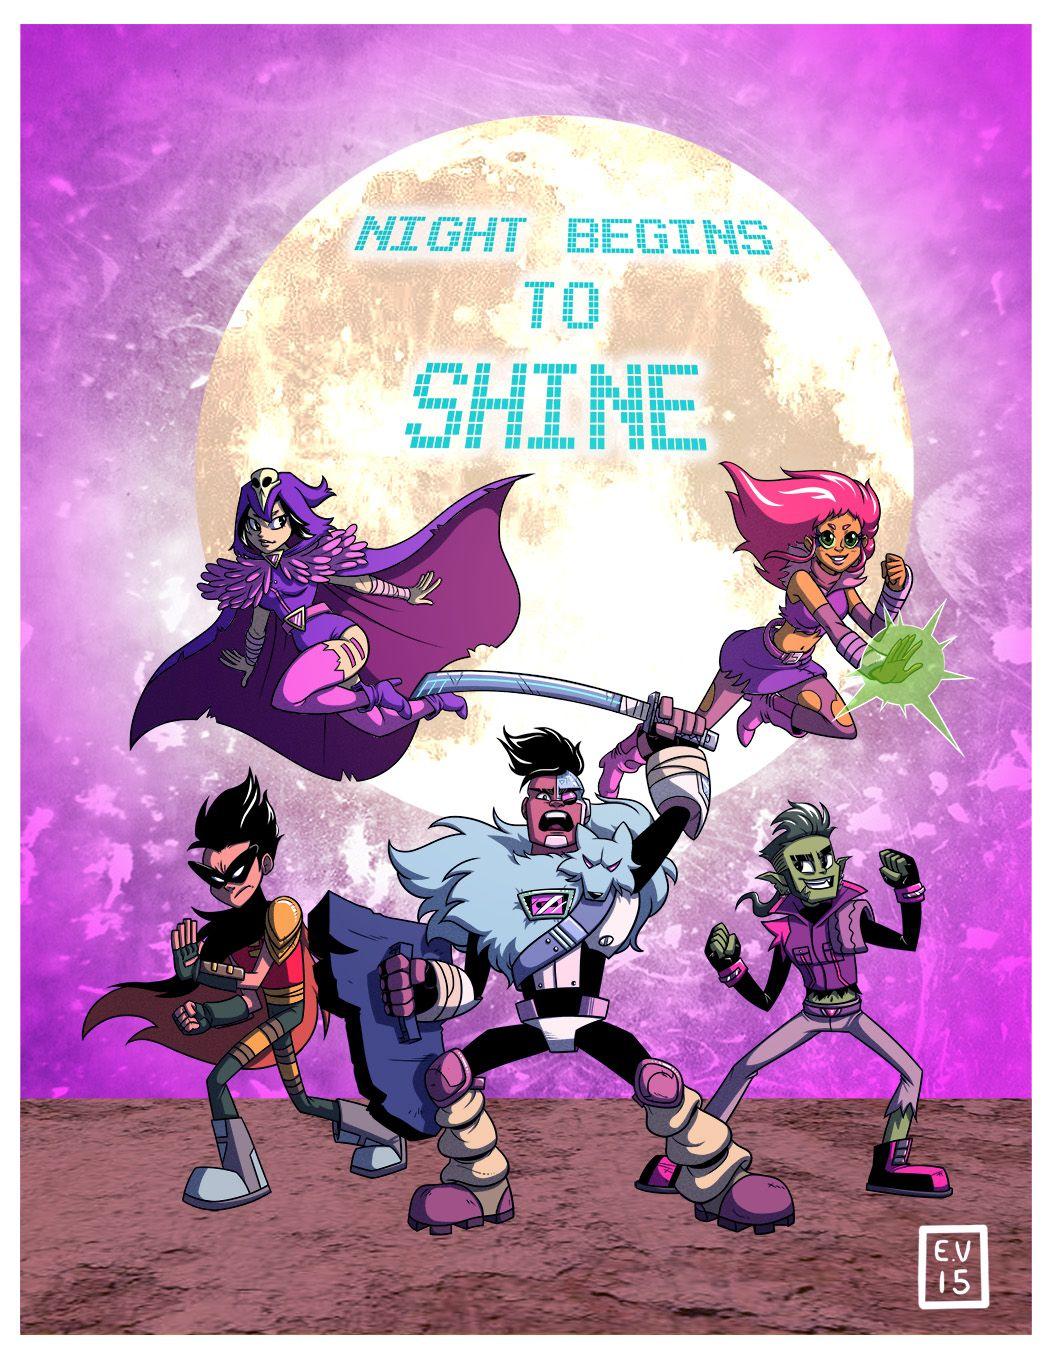 ♪When we're dancing, the night begins to shine!♪. Teen Titans